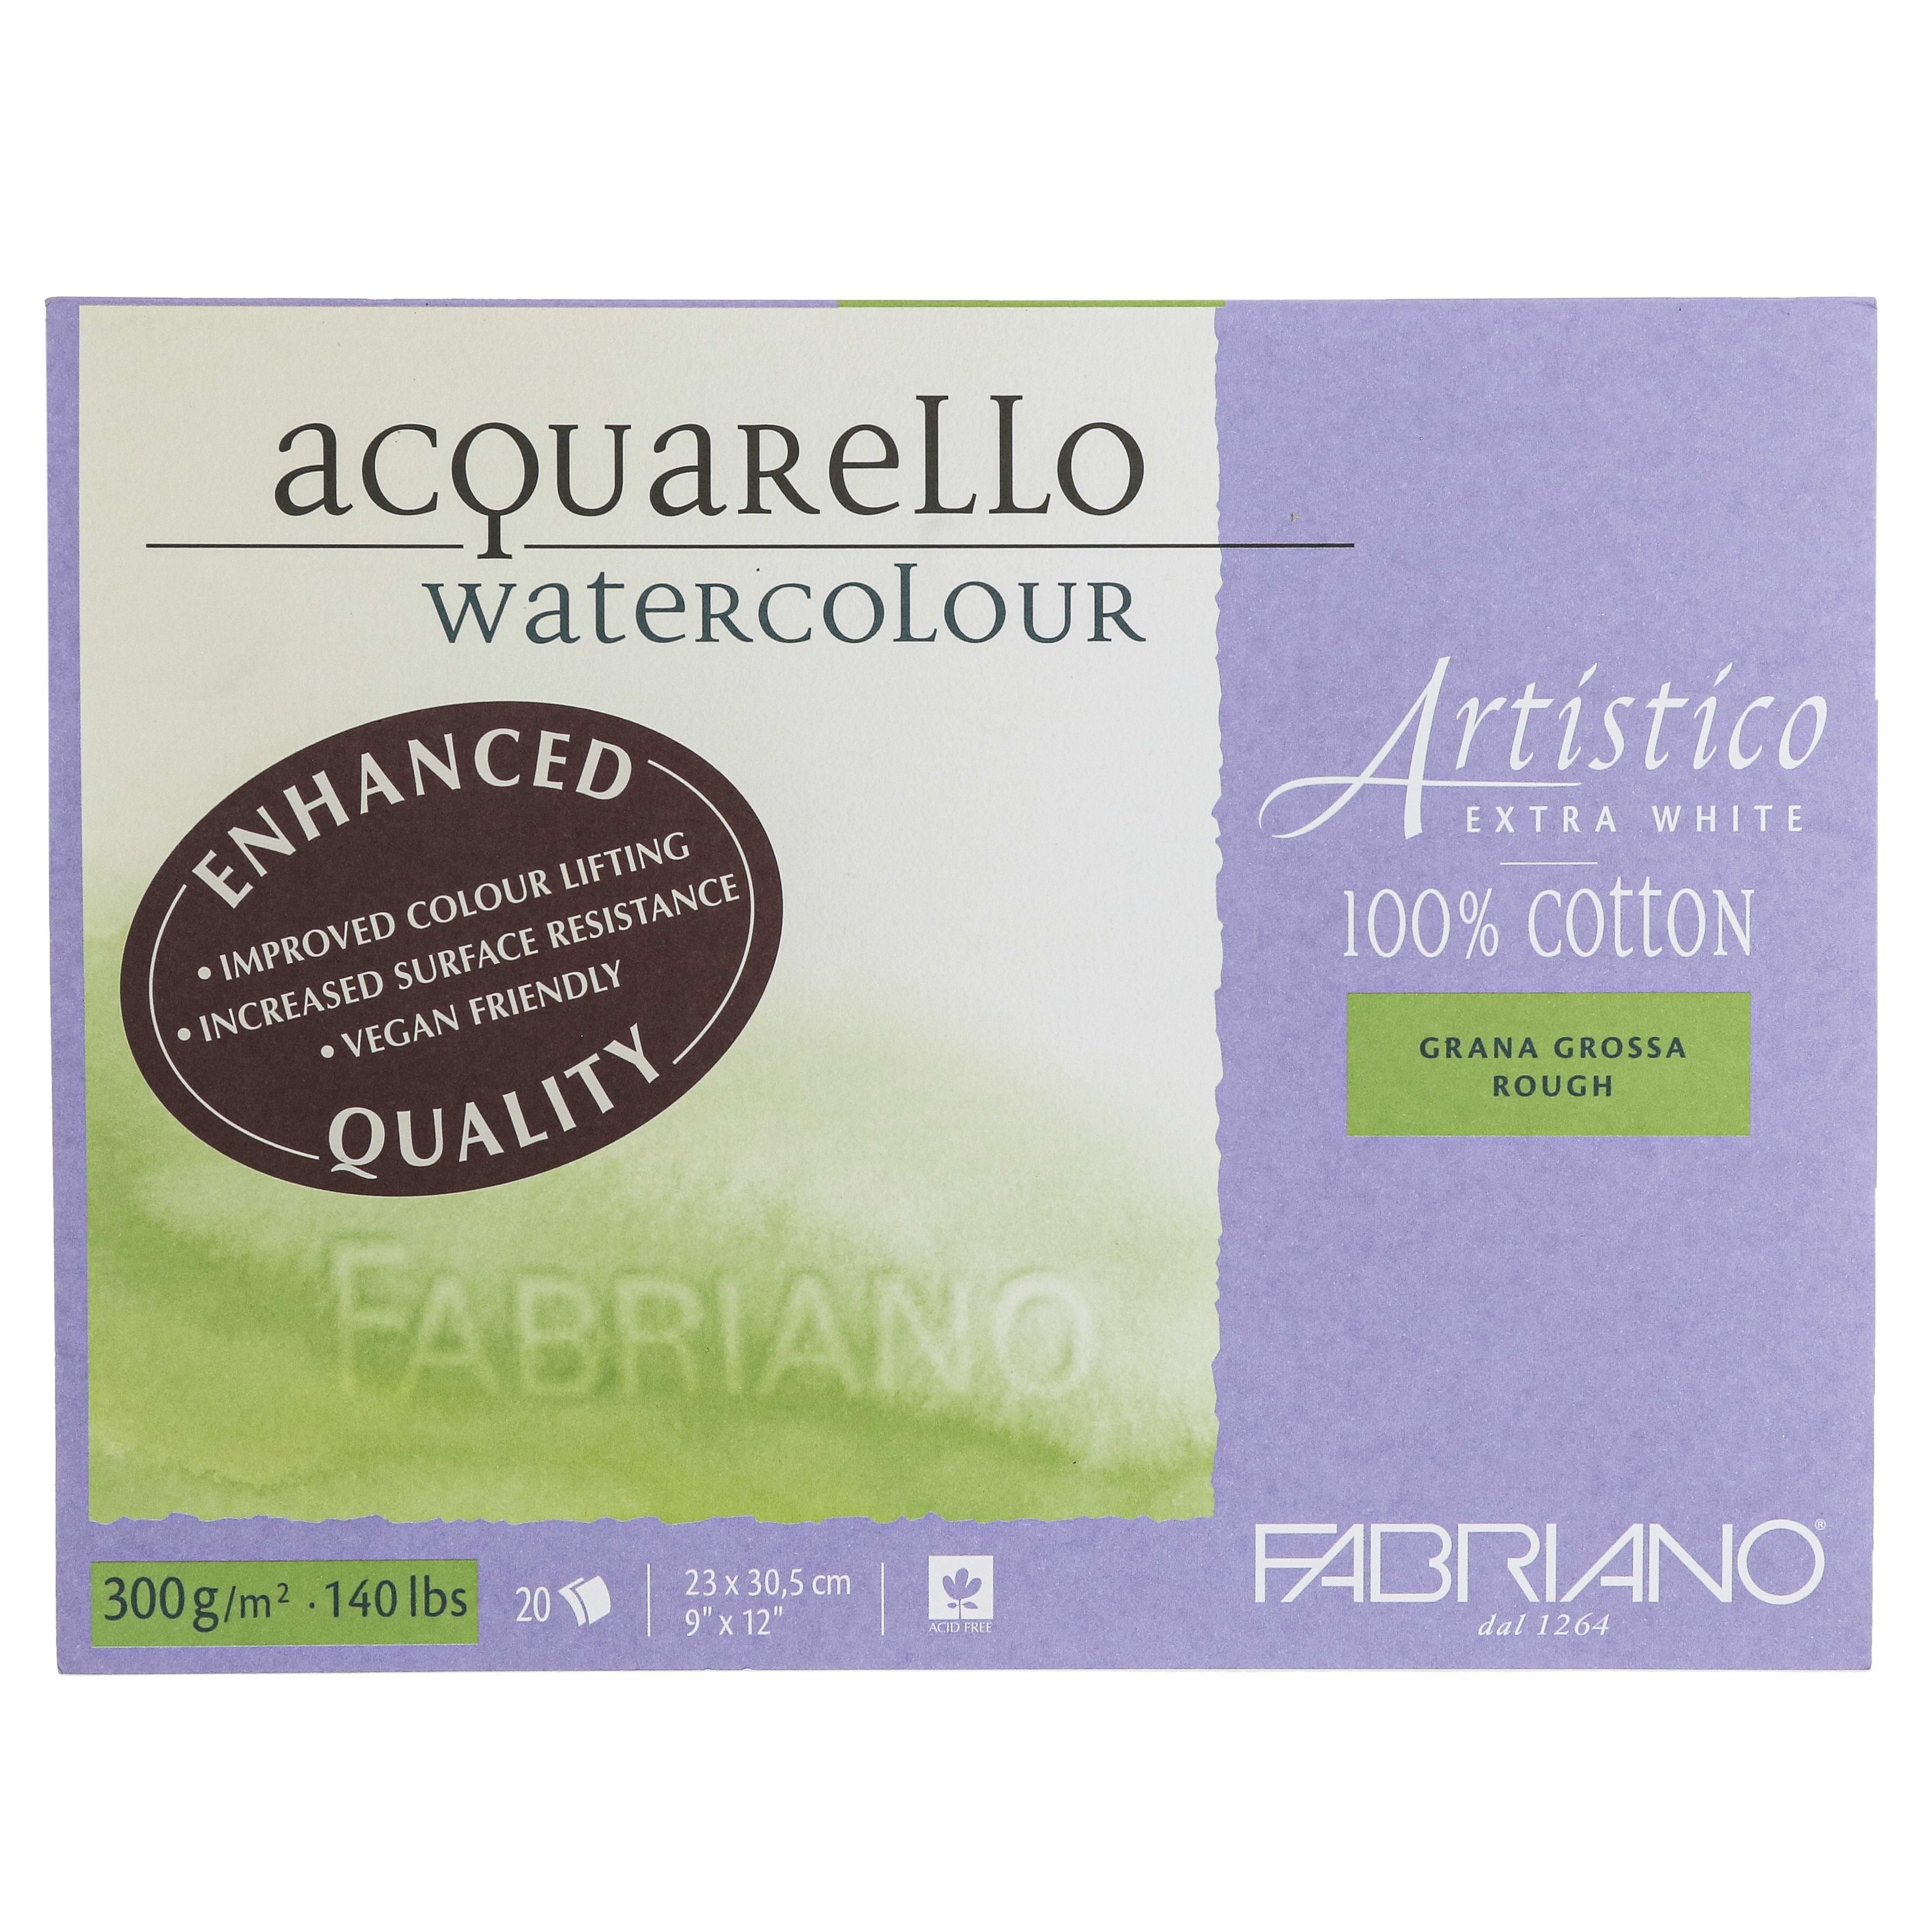 Fabriano Watercolor Pad 24 Sheets, Best Price Online